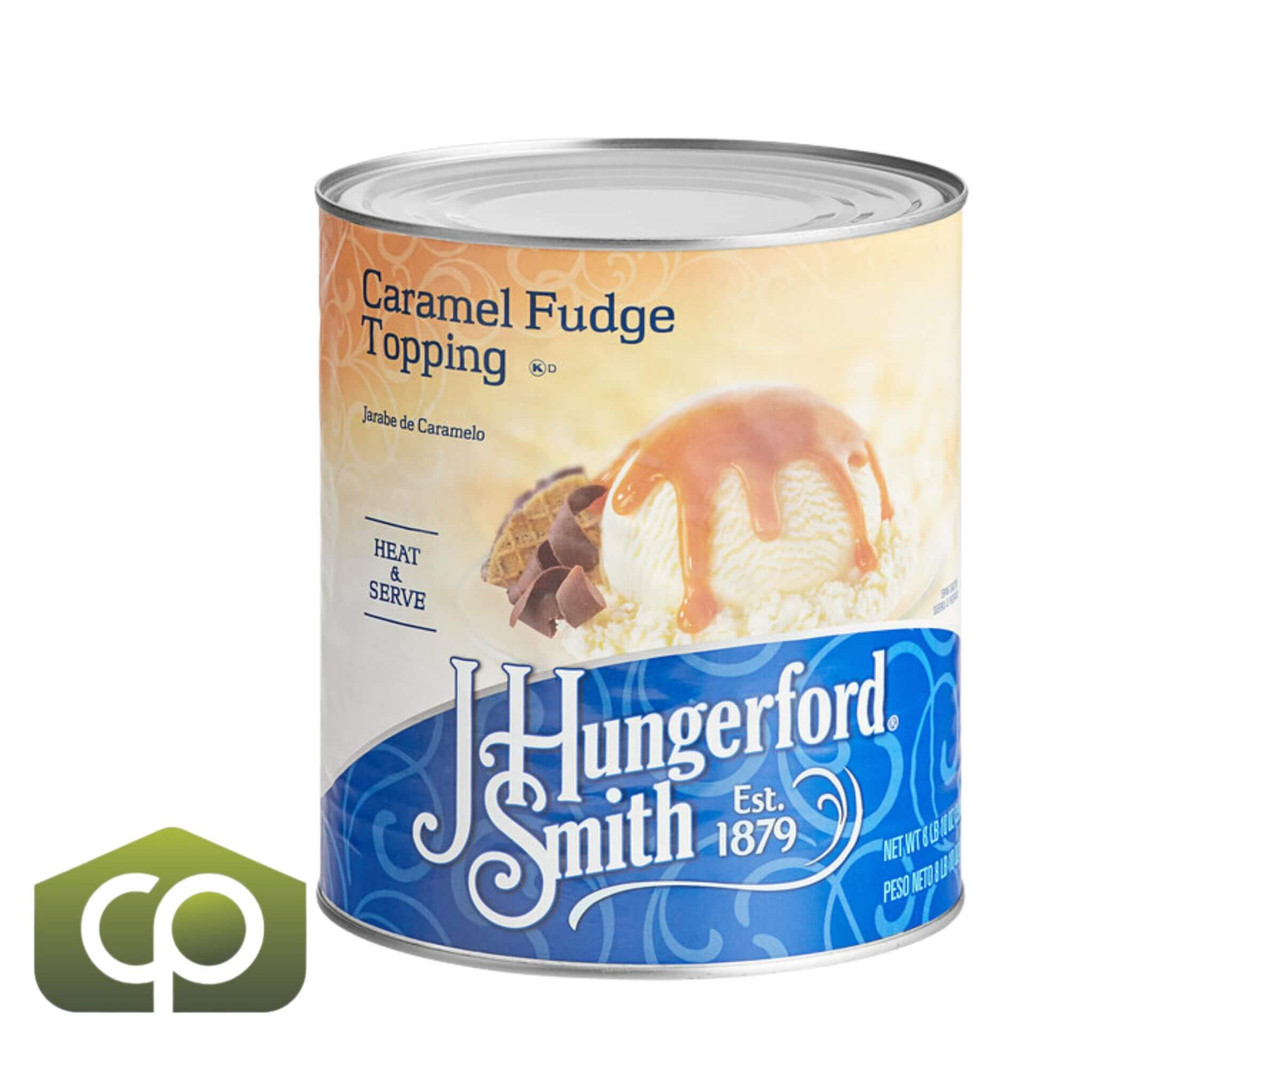 J. Hungerford Smith Caramel Fudge Topping - 56 lb. (25.40 kg)-Chicken Pieces